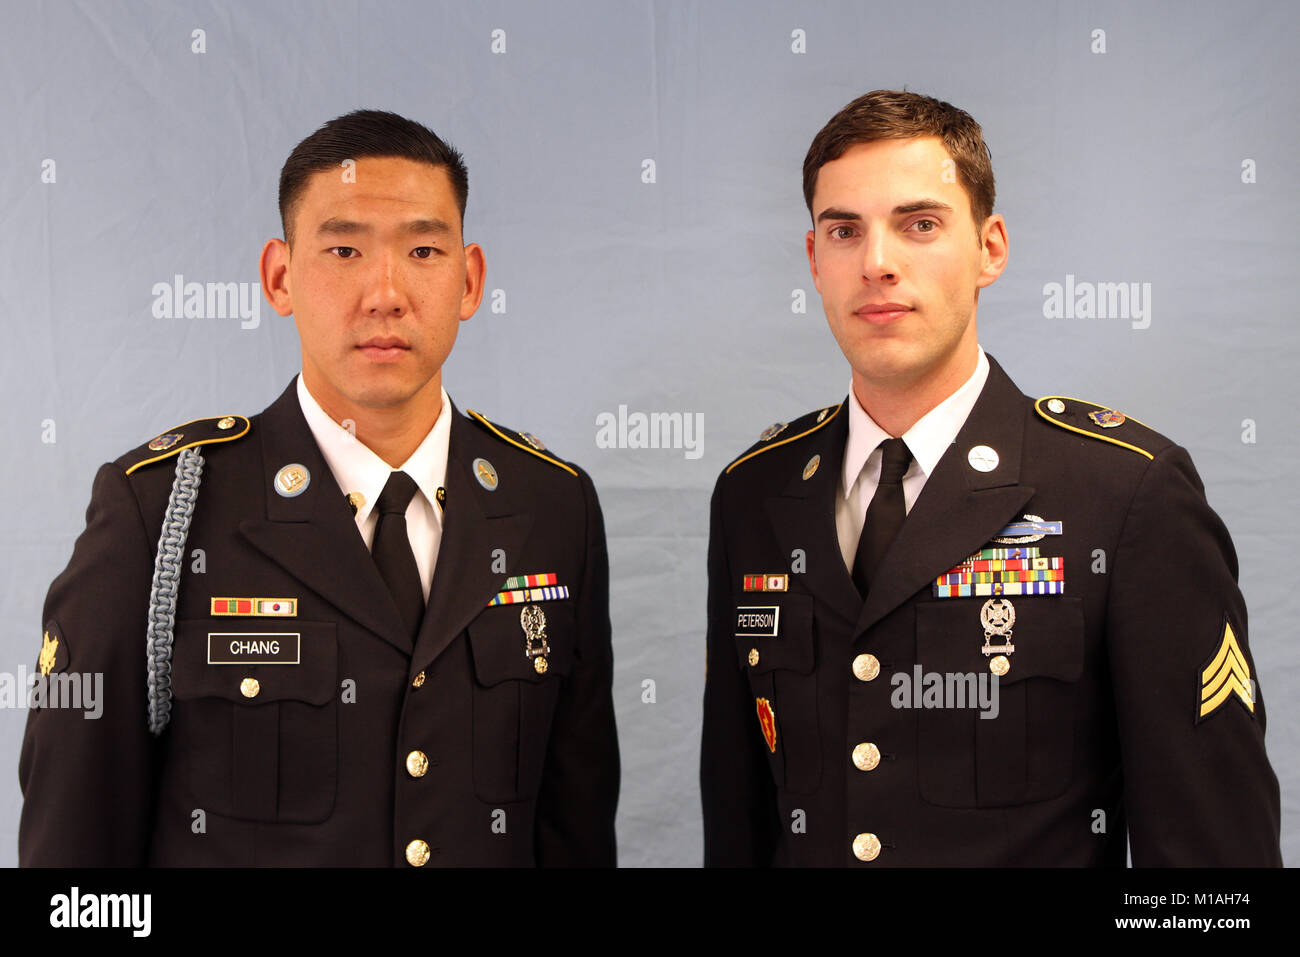 From the California Army National Guard: Spc. David Chang, left